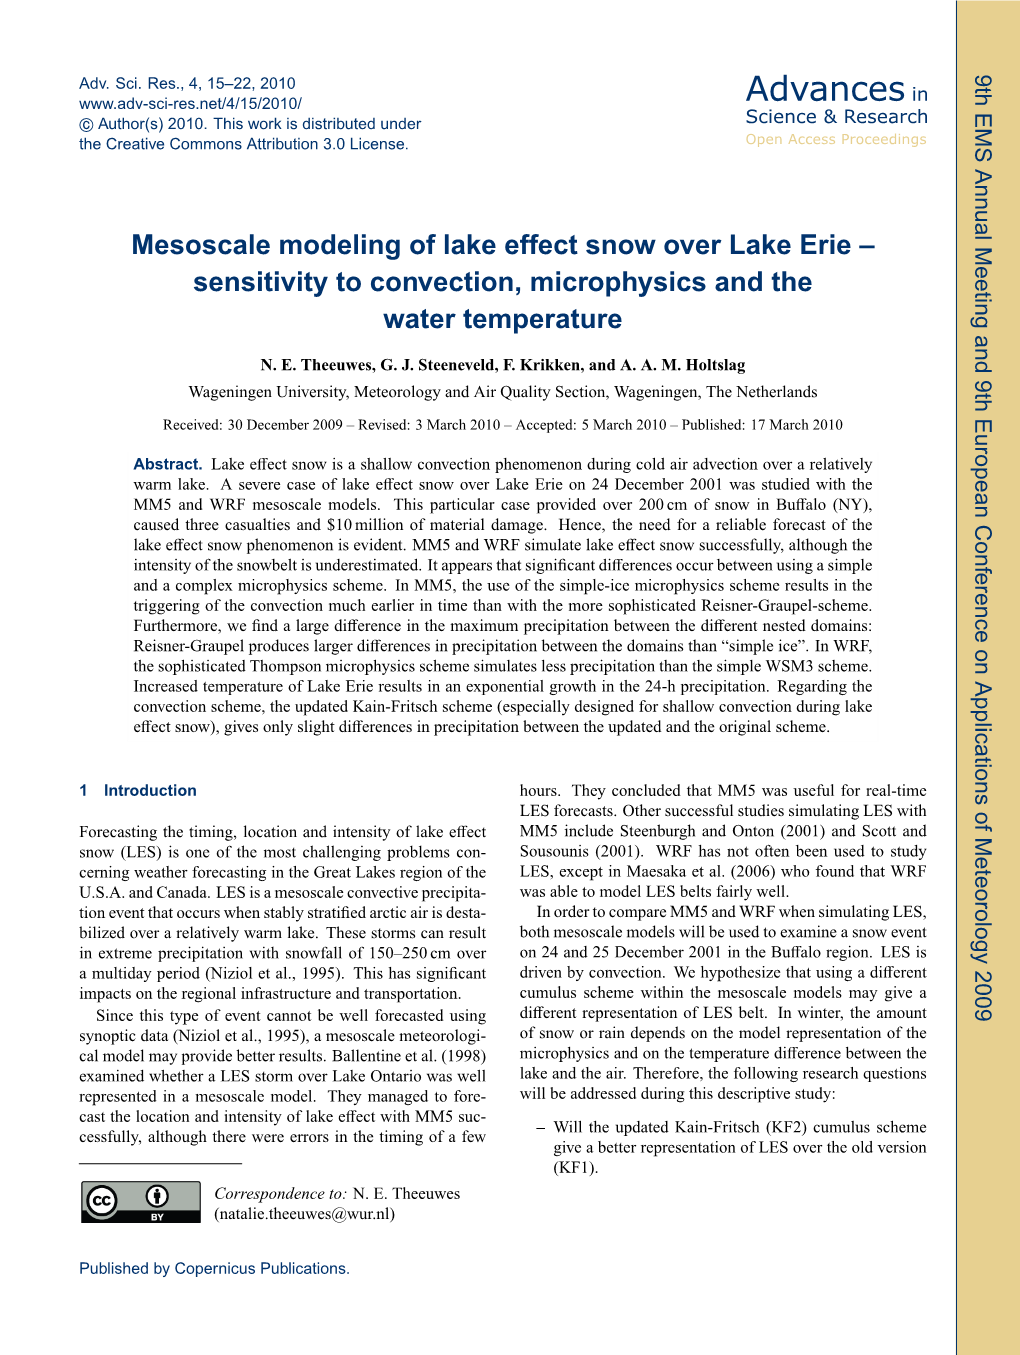 Mesoscale Modeling of Lake Effect Snow Over Lake Erie–Sensitivity To